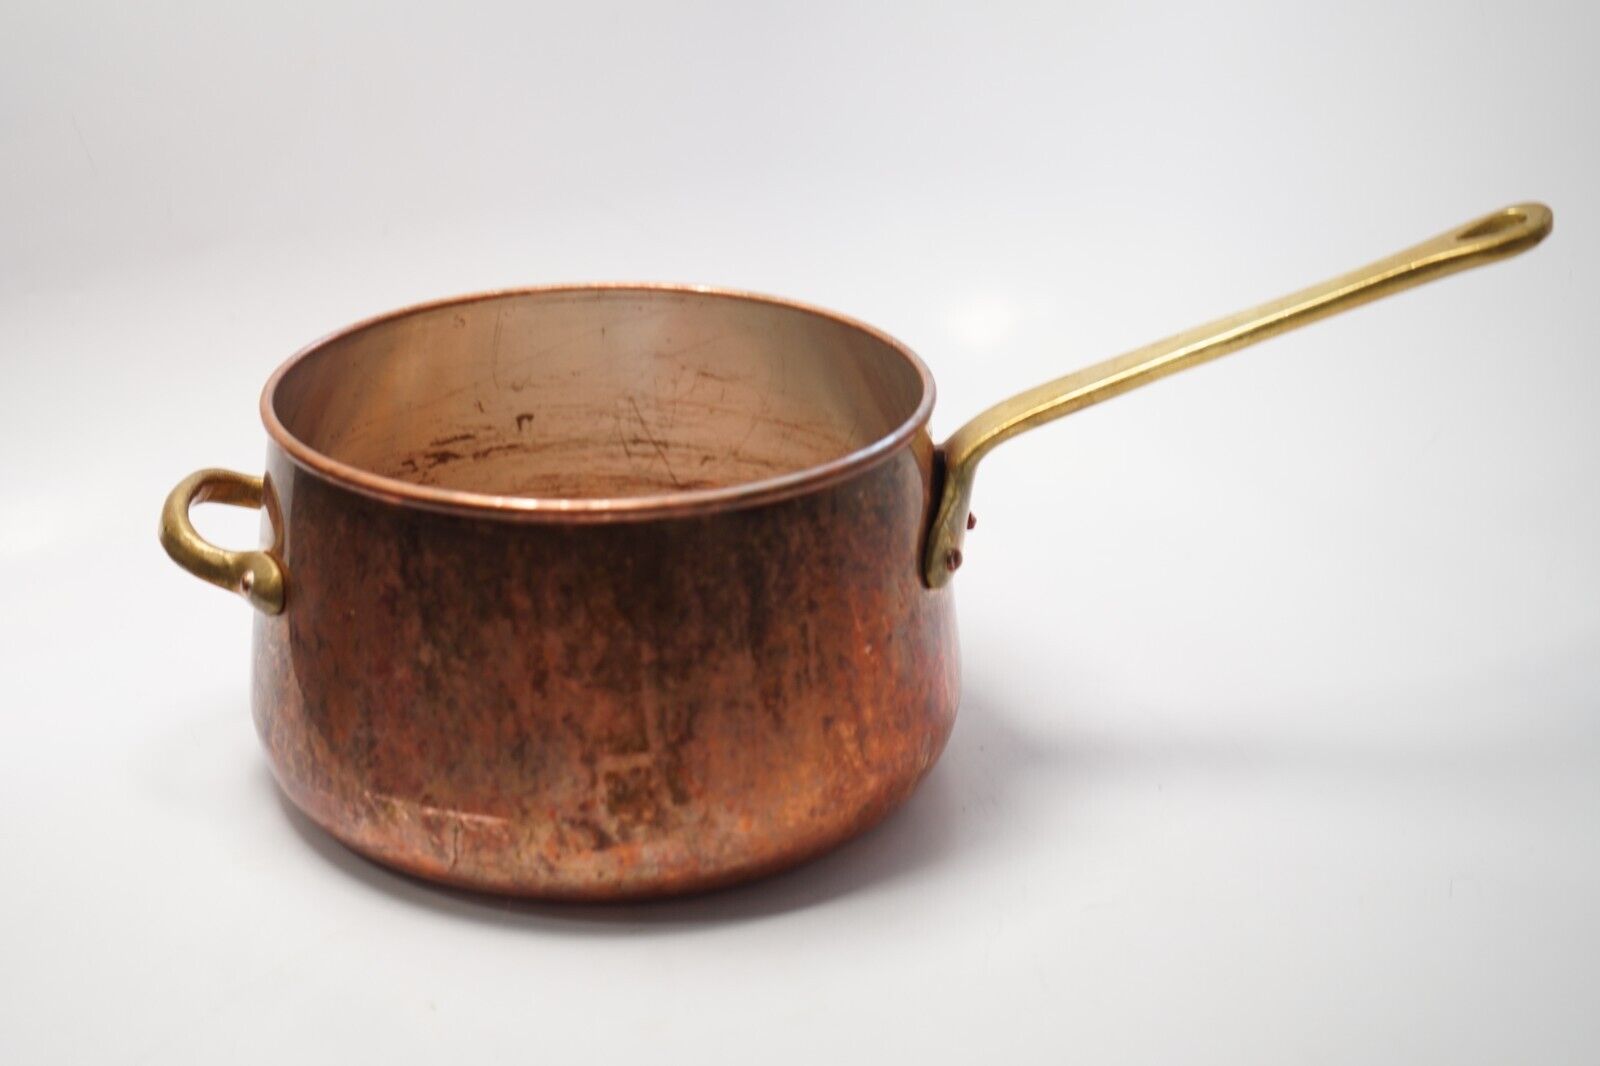 VTG Large Sauce Pan Pot Copper w/ Brass Handle Unmarked Decor Aged Rustic Hammer